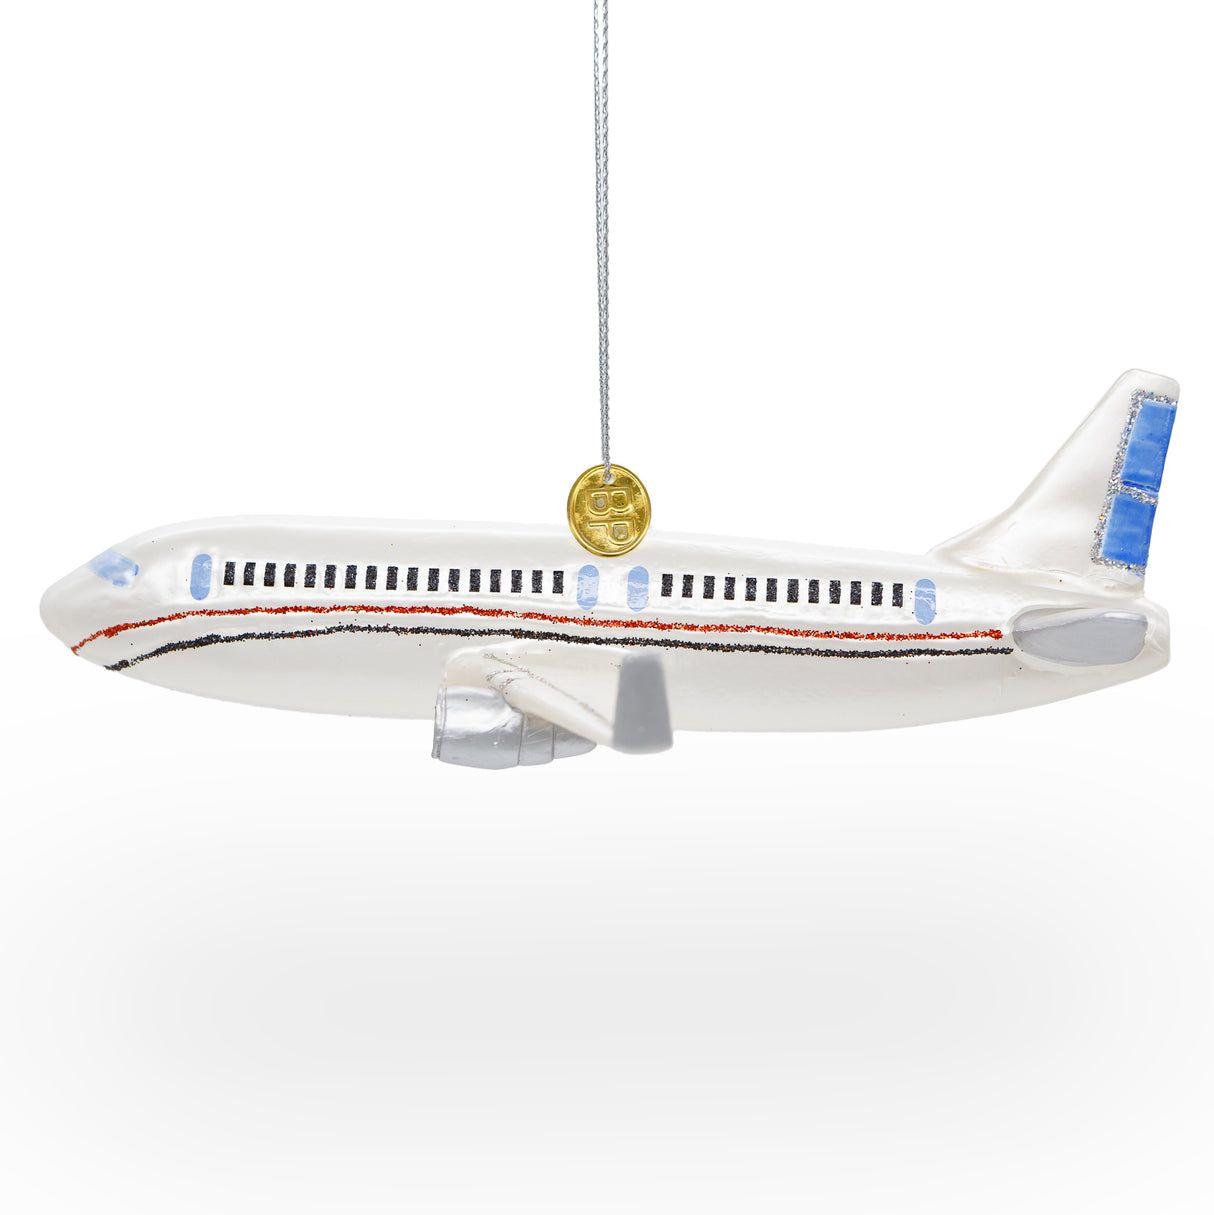 Passenger Jet Airplane - Blown Glass Christmas Ornament ,dimensions in inches: 1.5 x 4.8 x 6.5